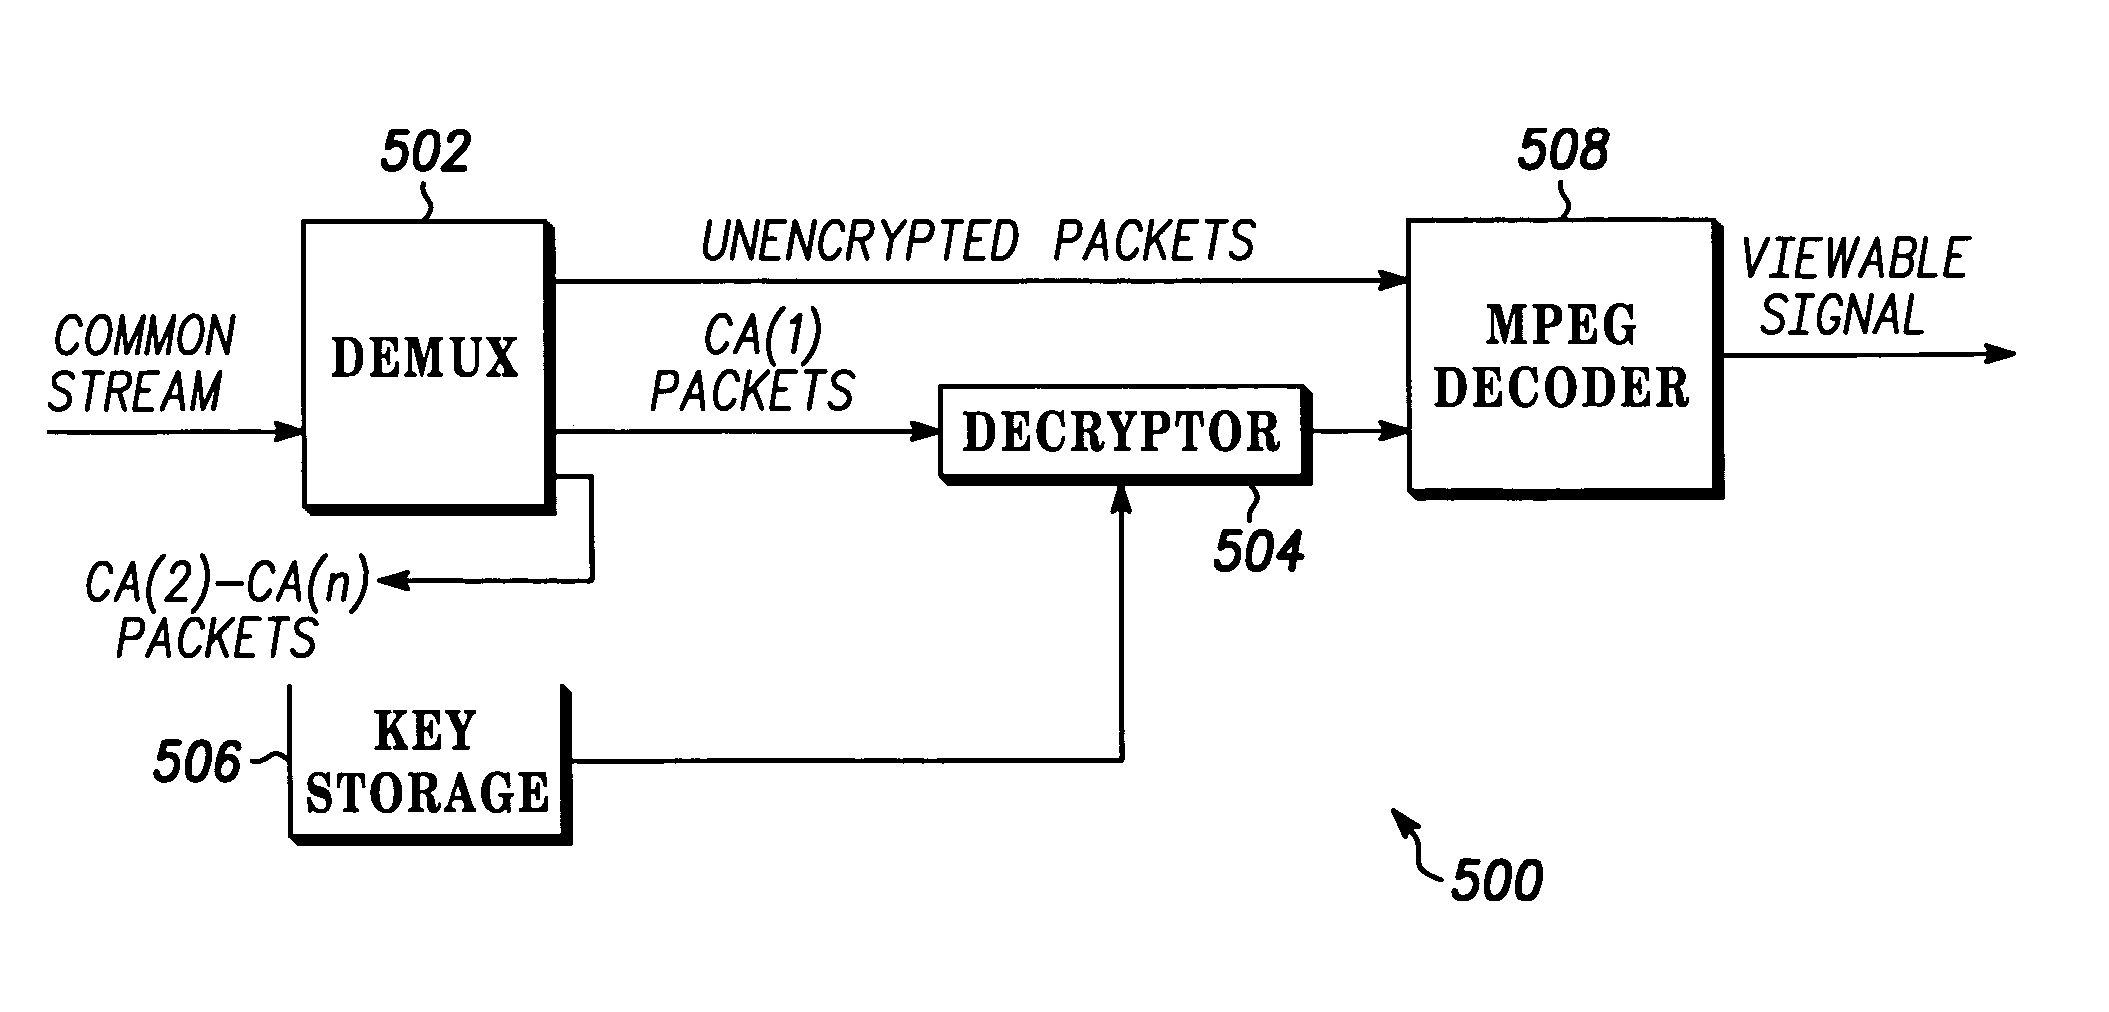 Efficient distribution of encrypted content for multiple content access systems